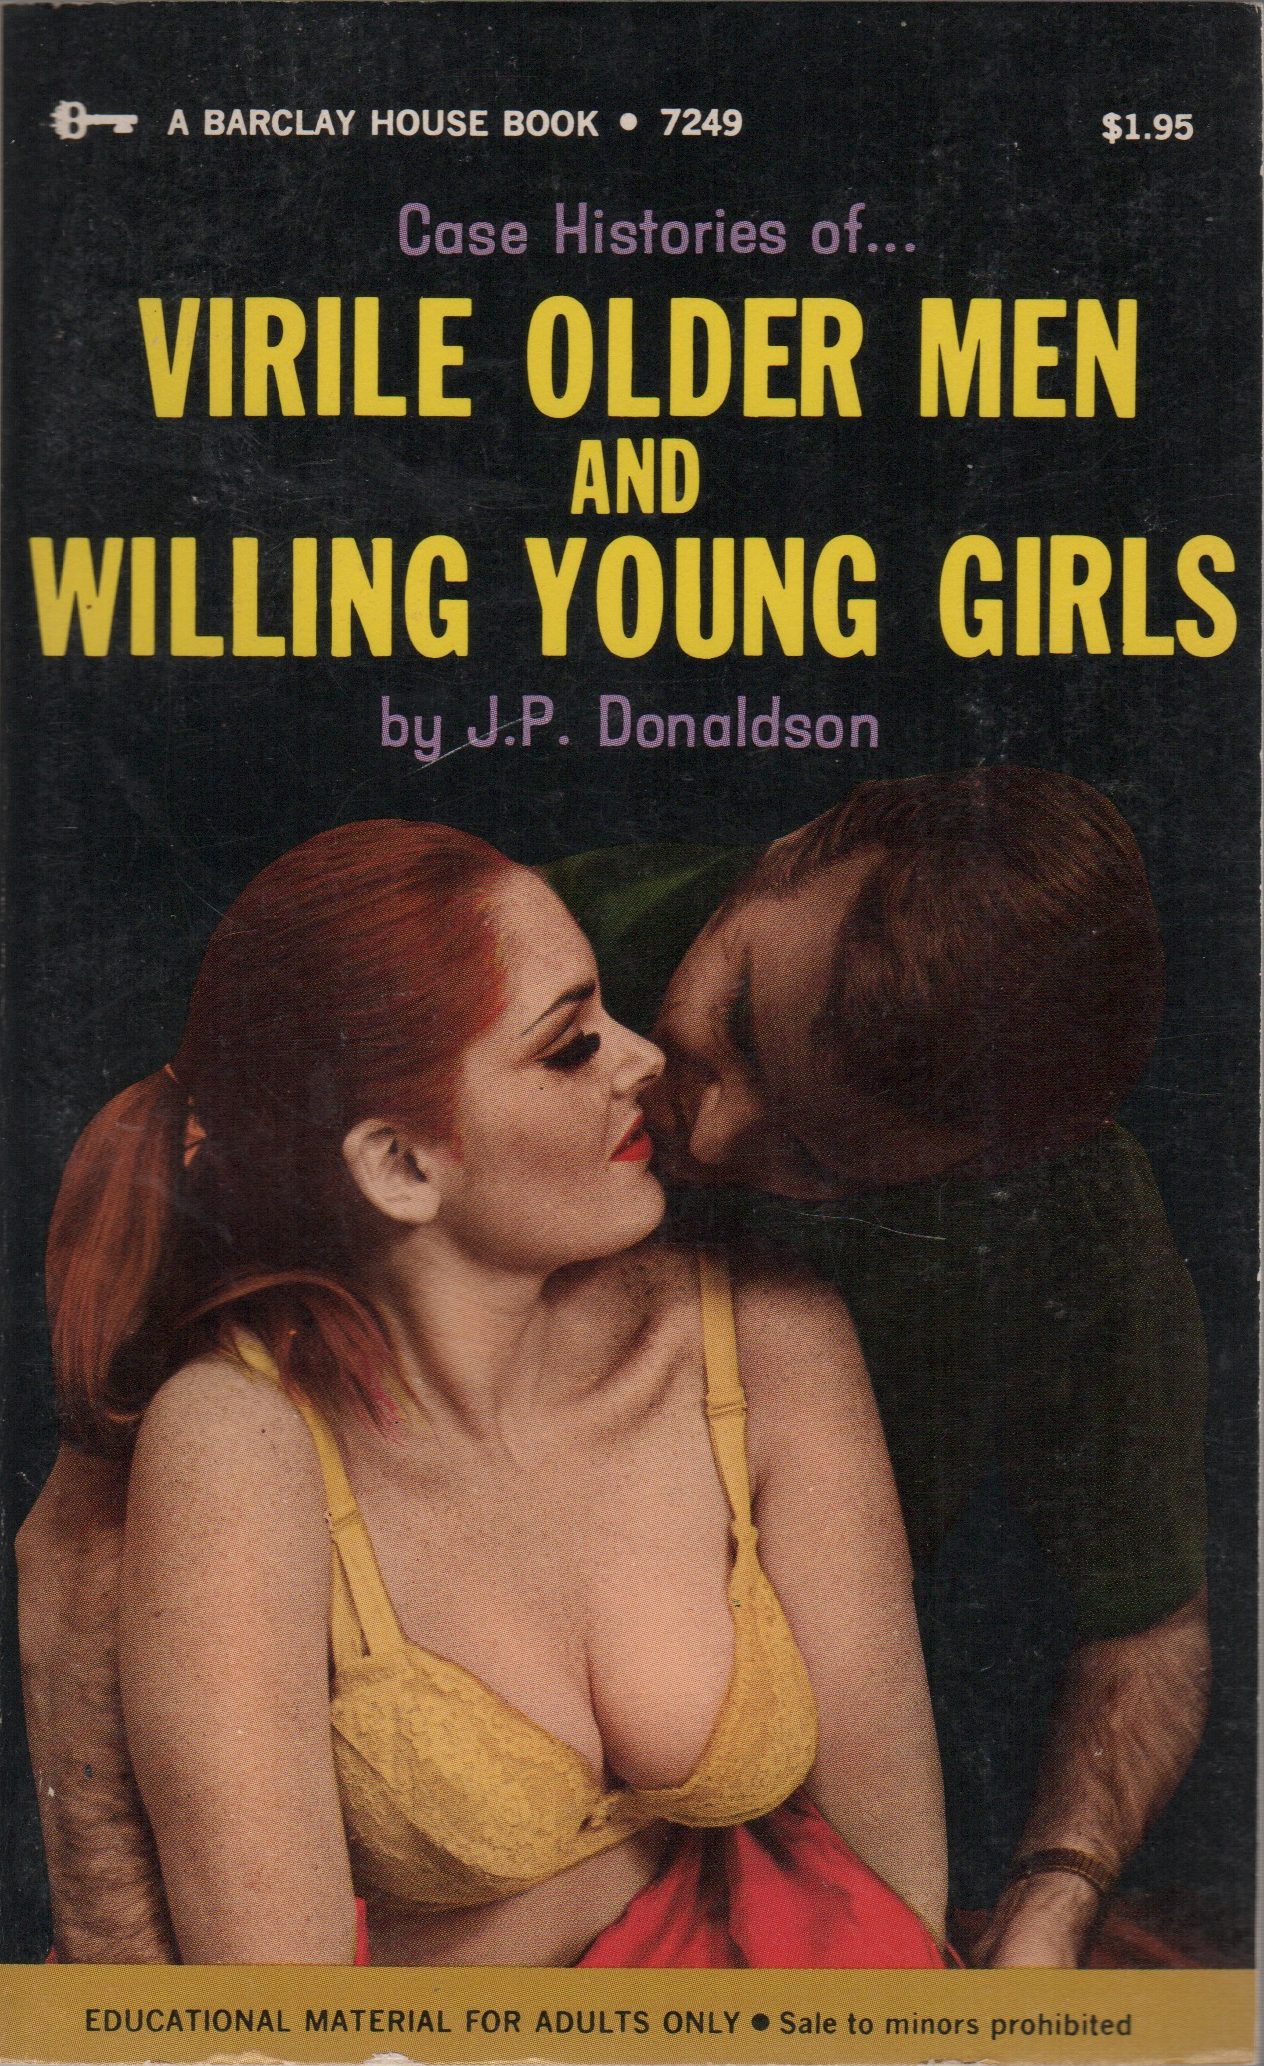 42. DONALDSON, J.P. [Pseud. Donald J. Pfeil]. CASE HISTORIES OF...VIRILE OLDER MEN AND WILLING YOUNG GIRLS. Image